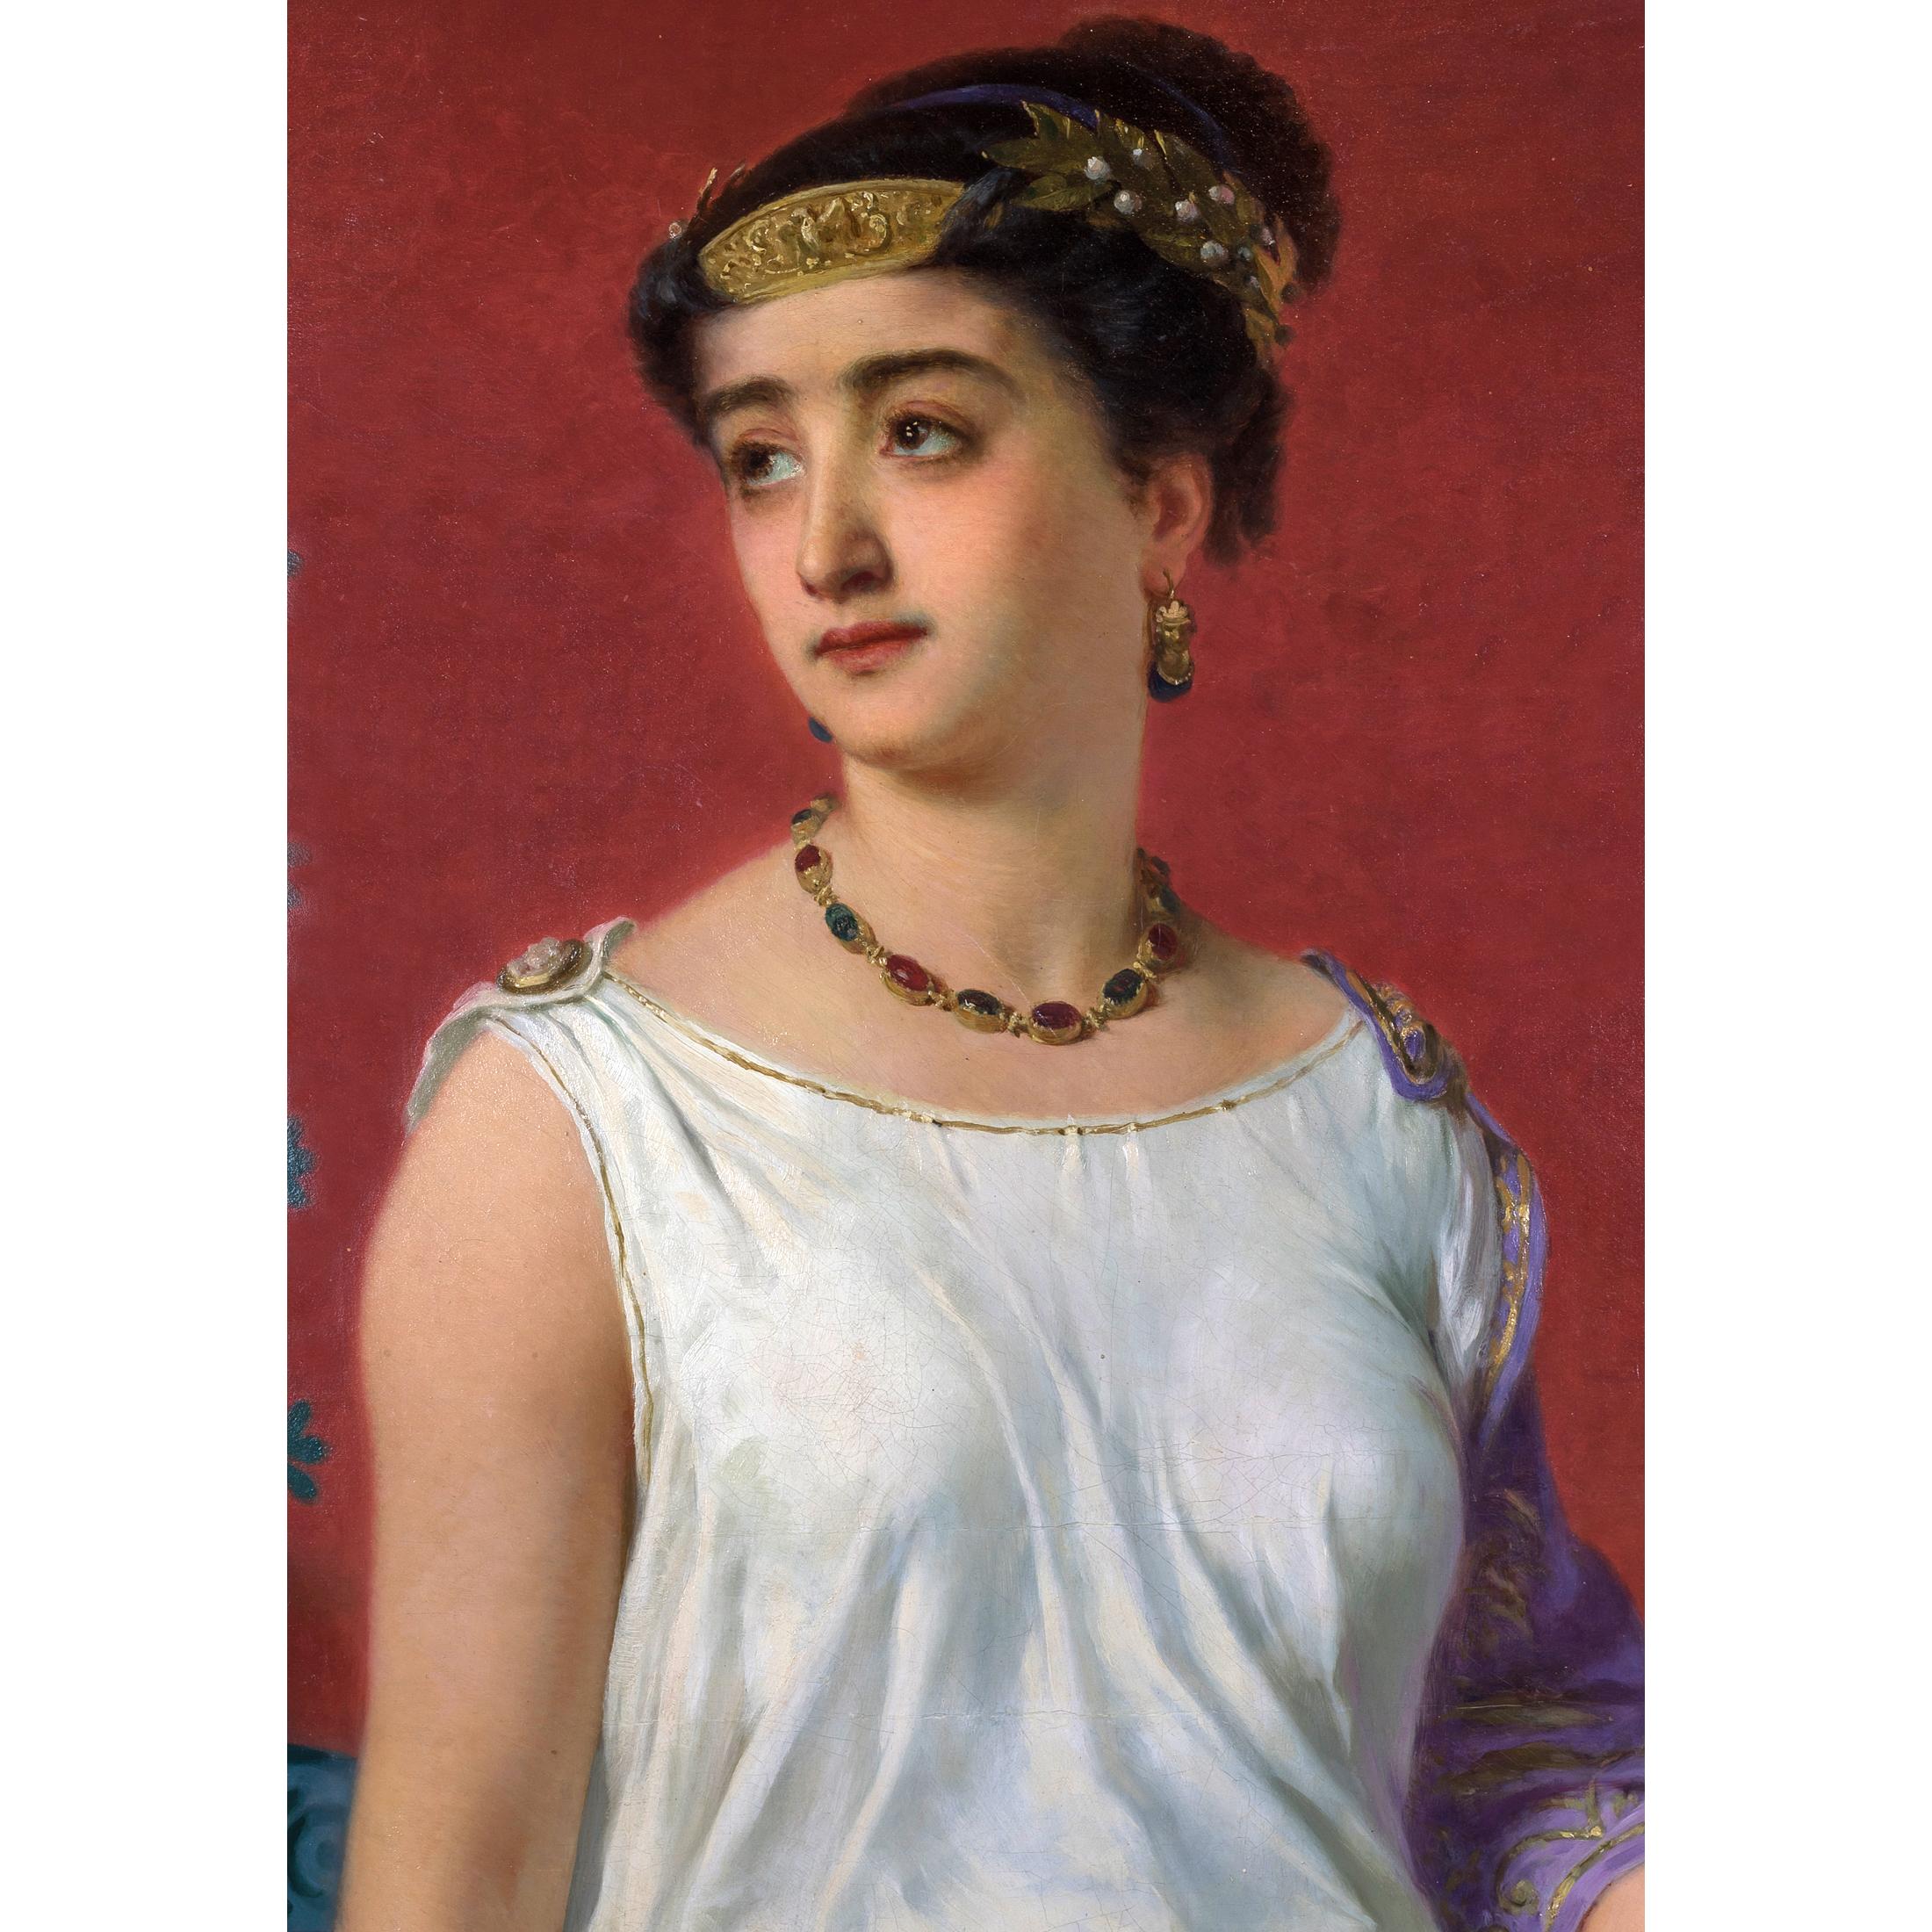 A Fine Portrait of a Young Grecian Beauty by C. Boutibonne - Painting by Charles-Édouard Boutibonne